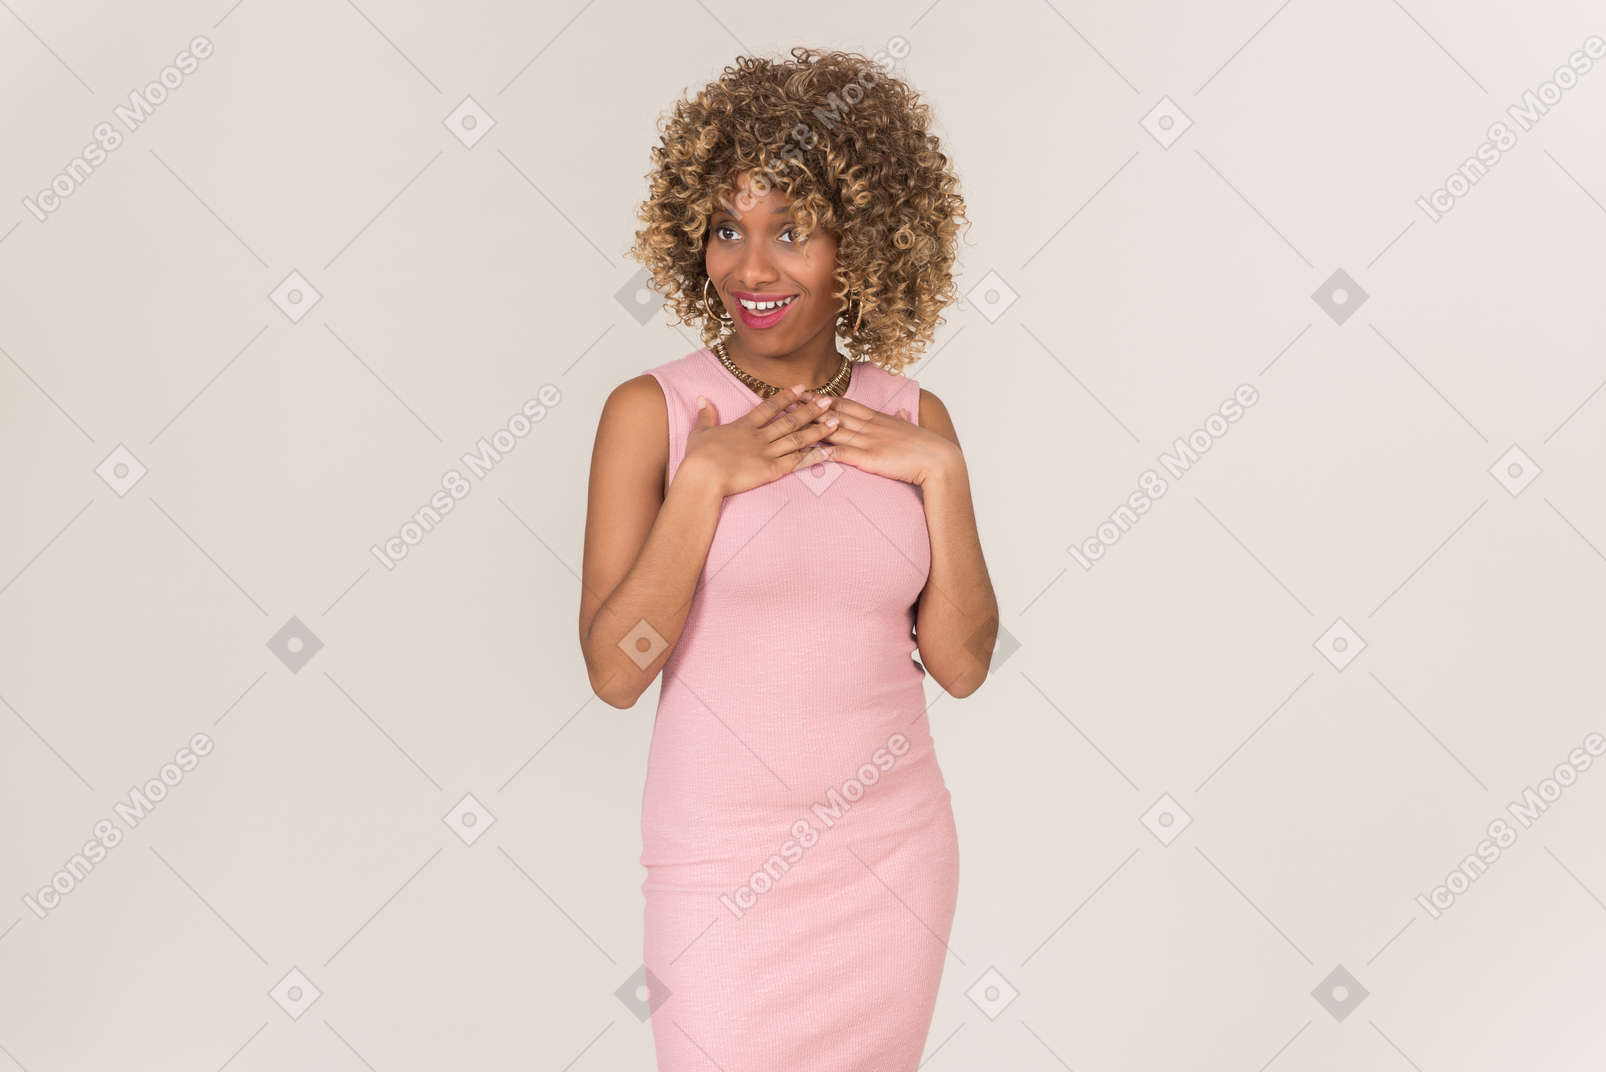 A flattered woman in pink dress